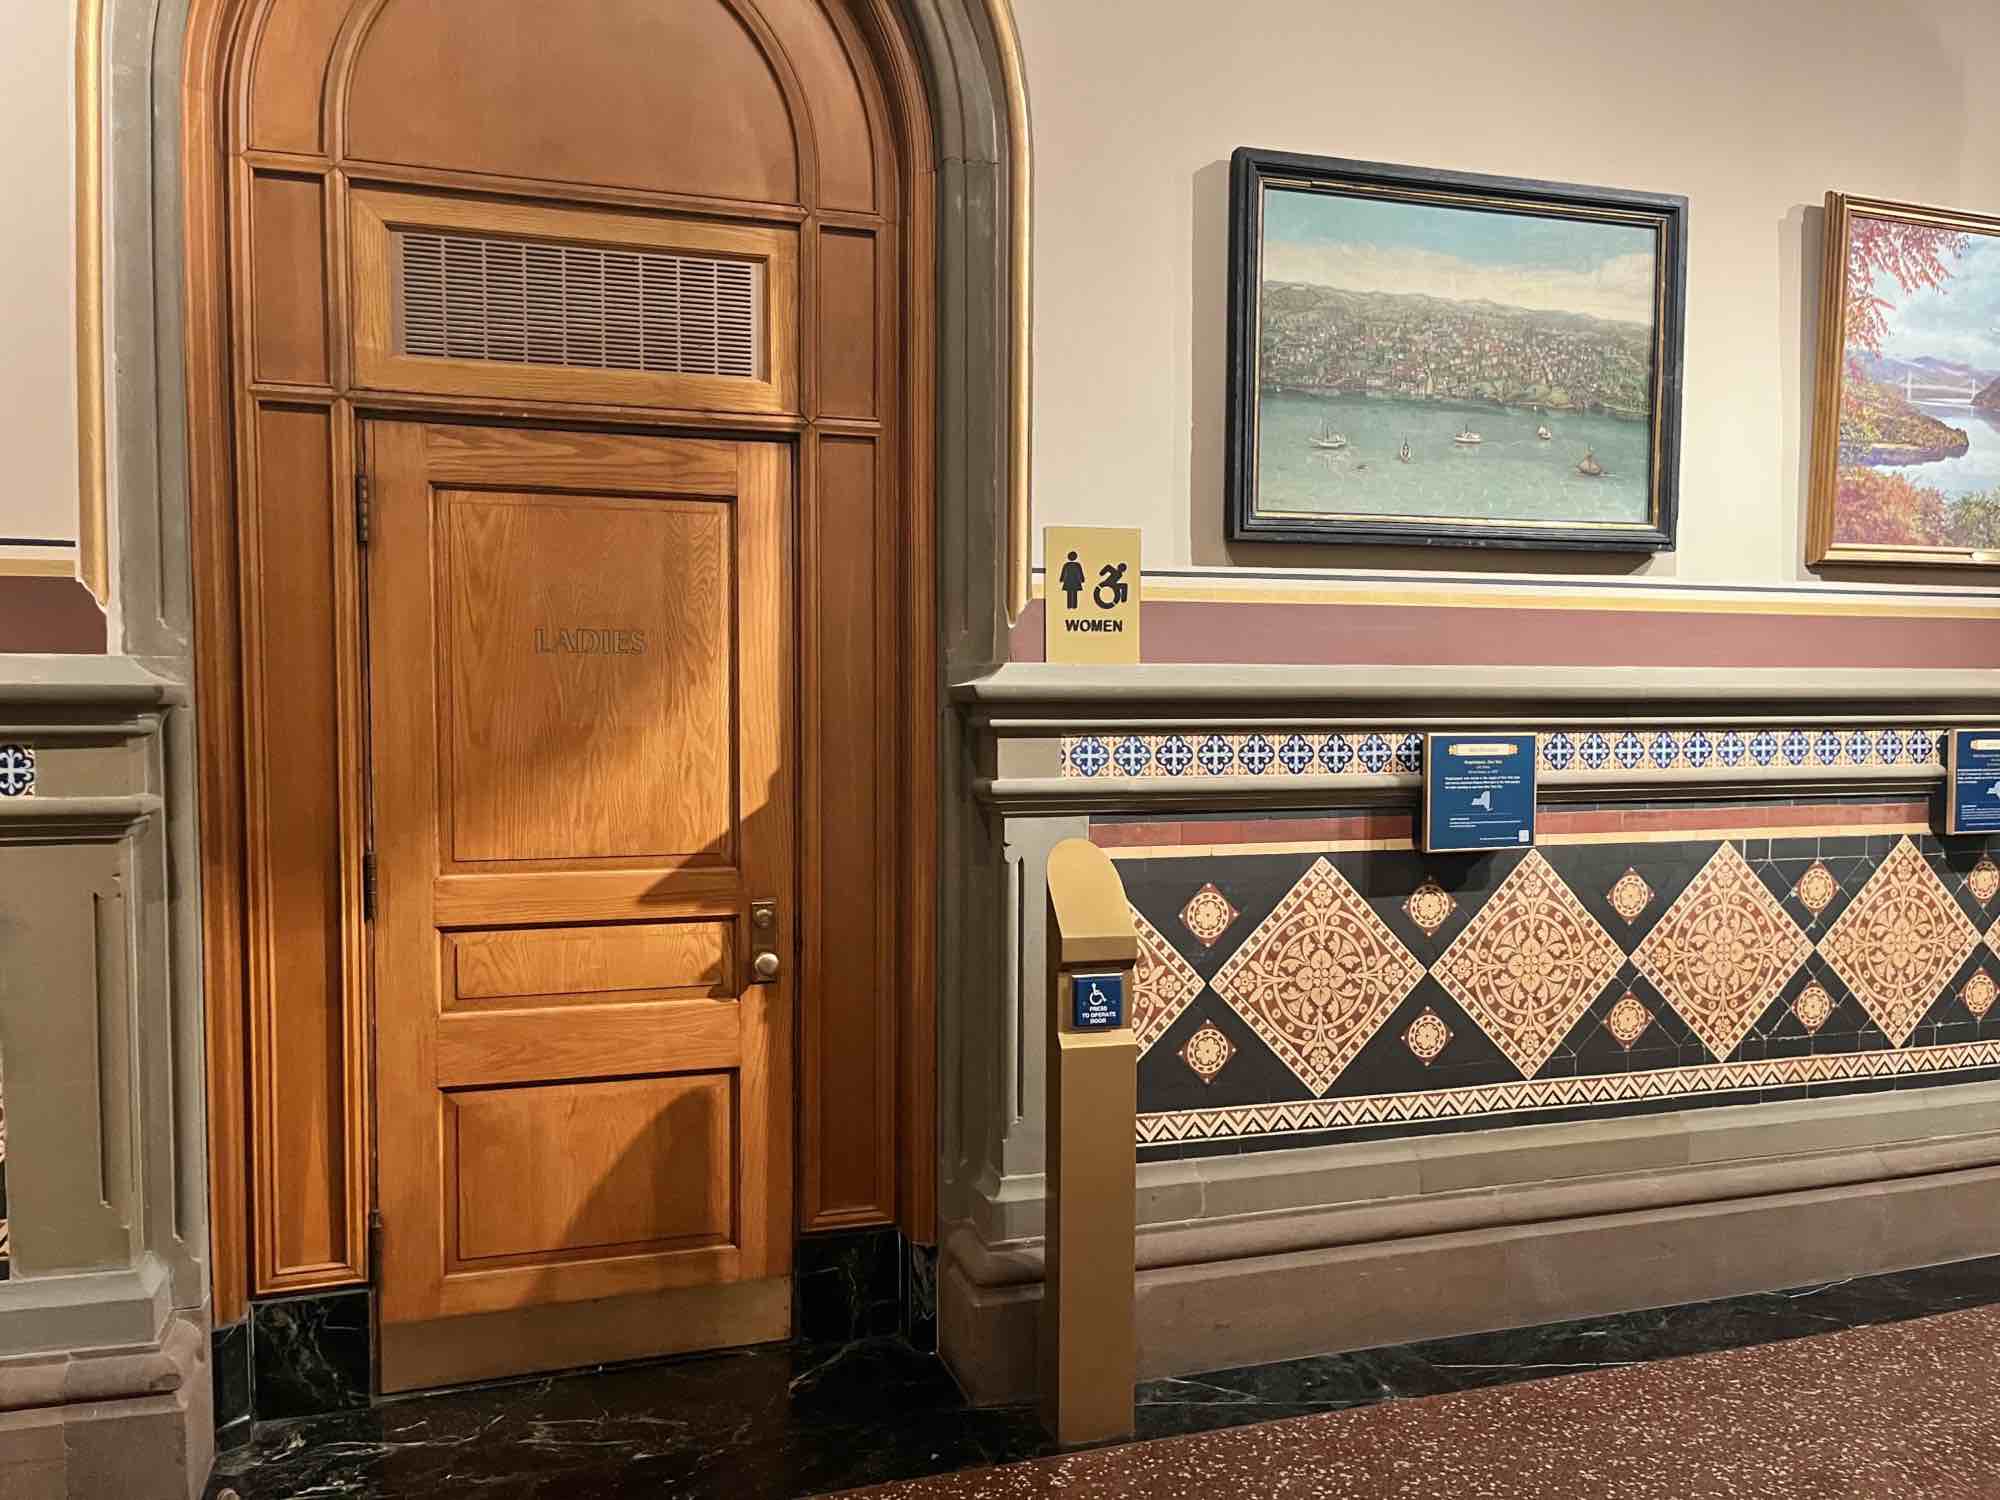 The exterior of the Women's Bathroom in the Capitol Building